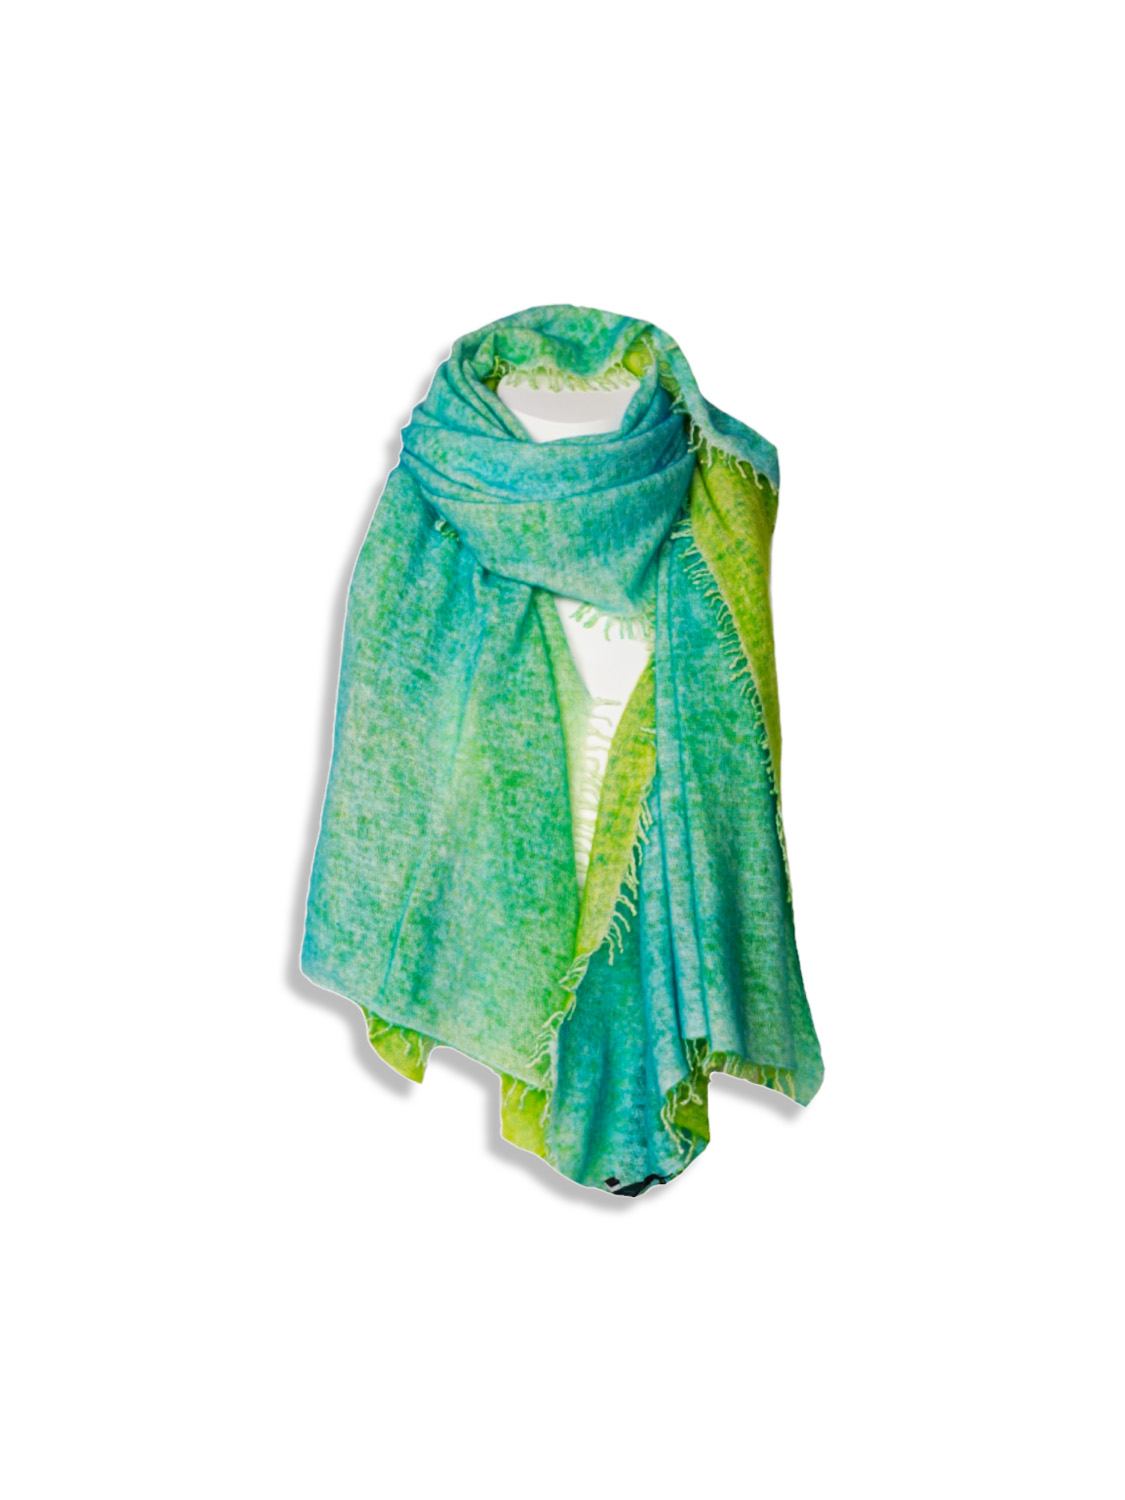 Stole Smacchinato - Scarf with fringe details in cashmere